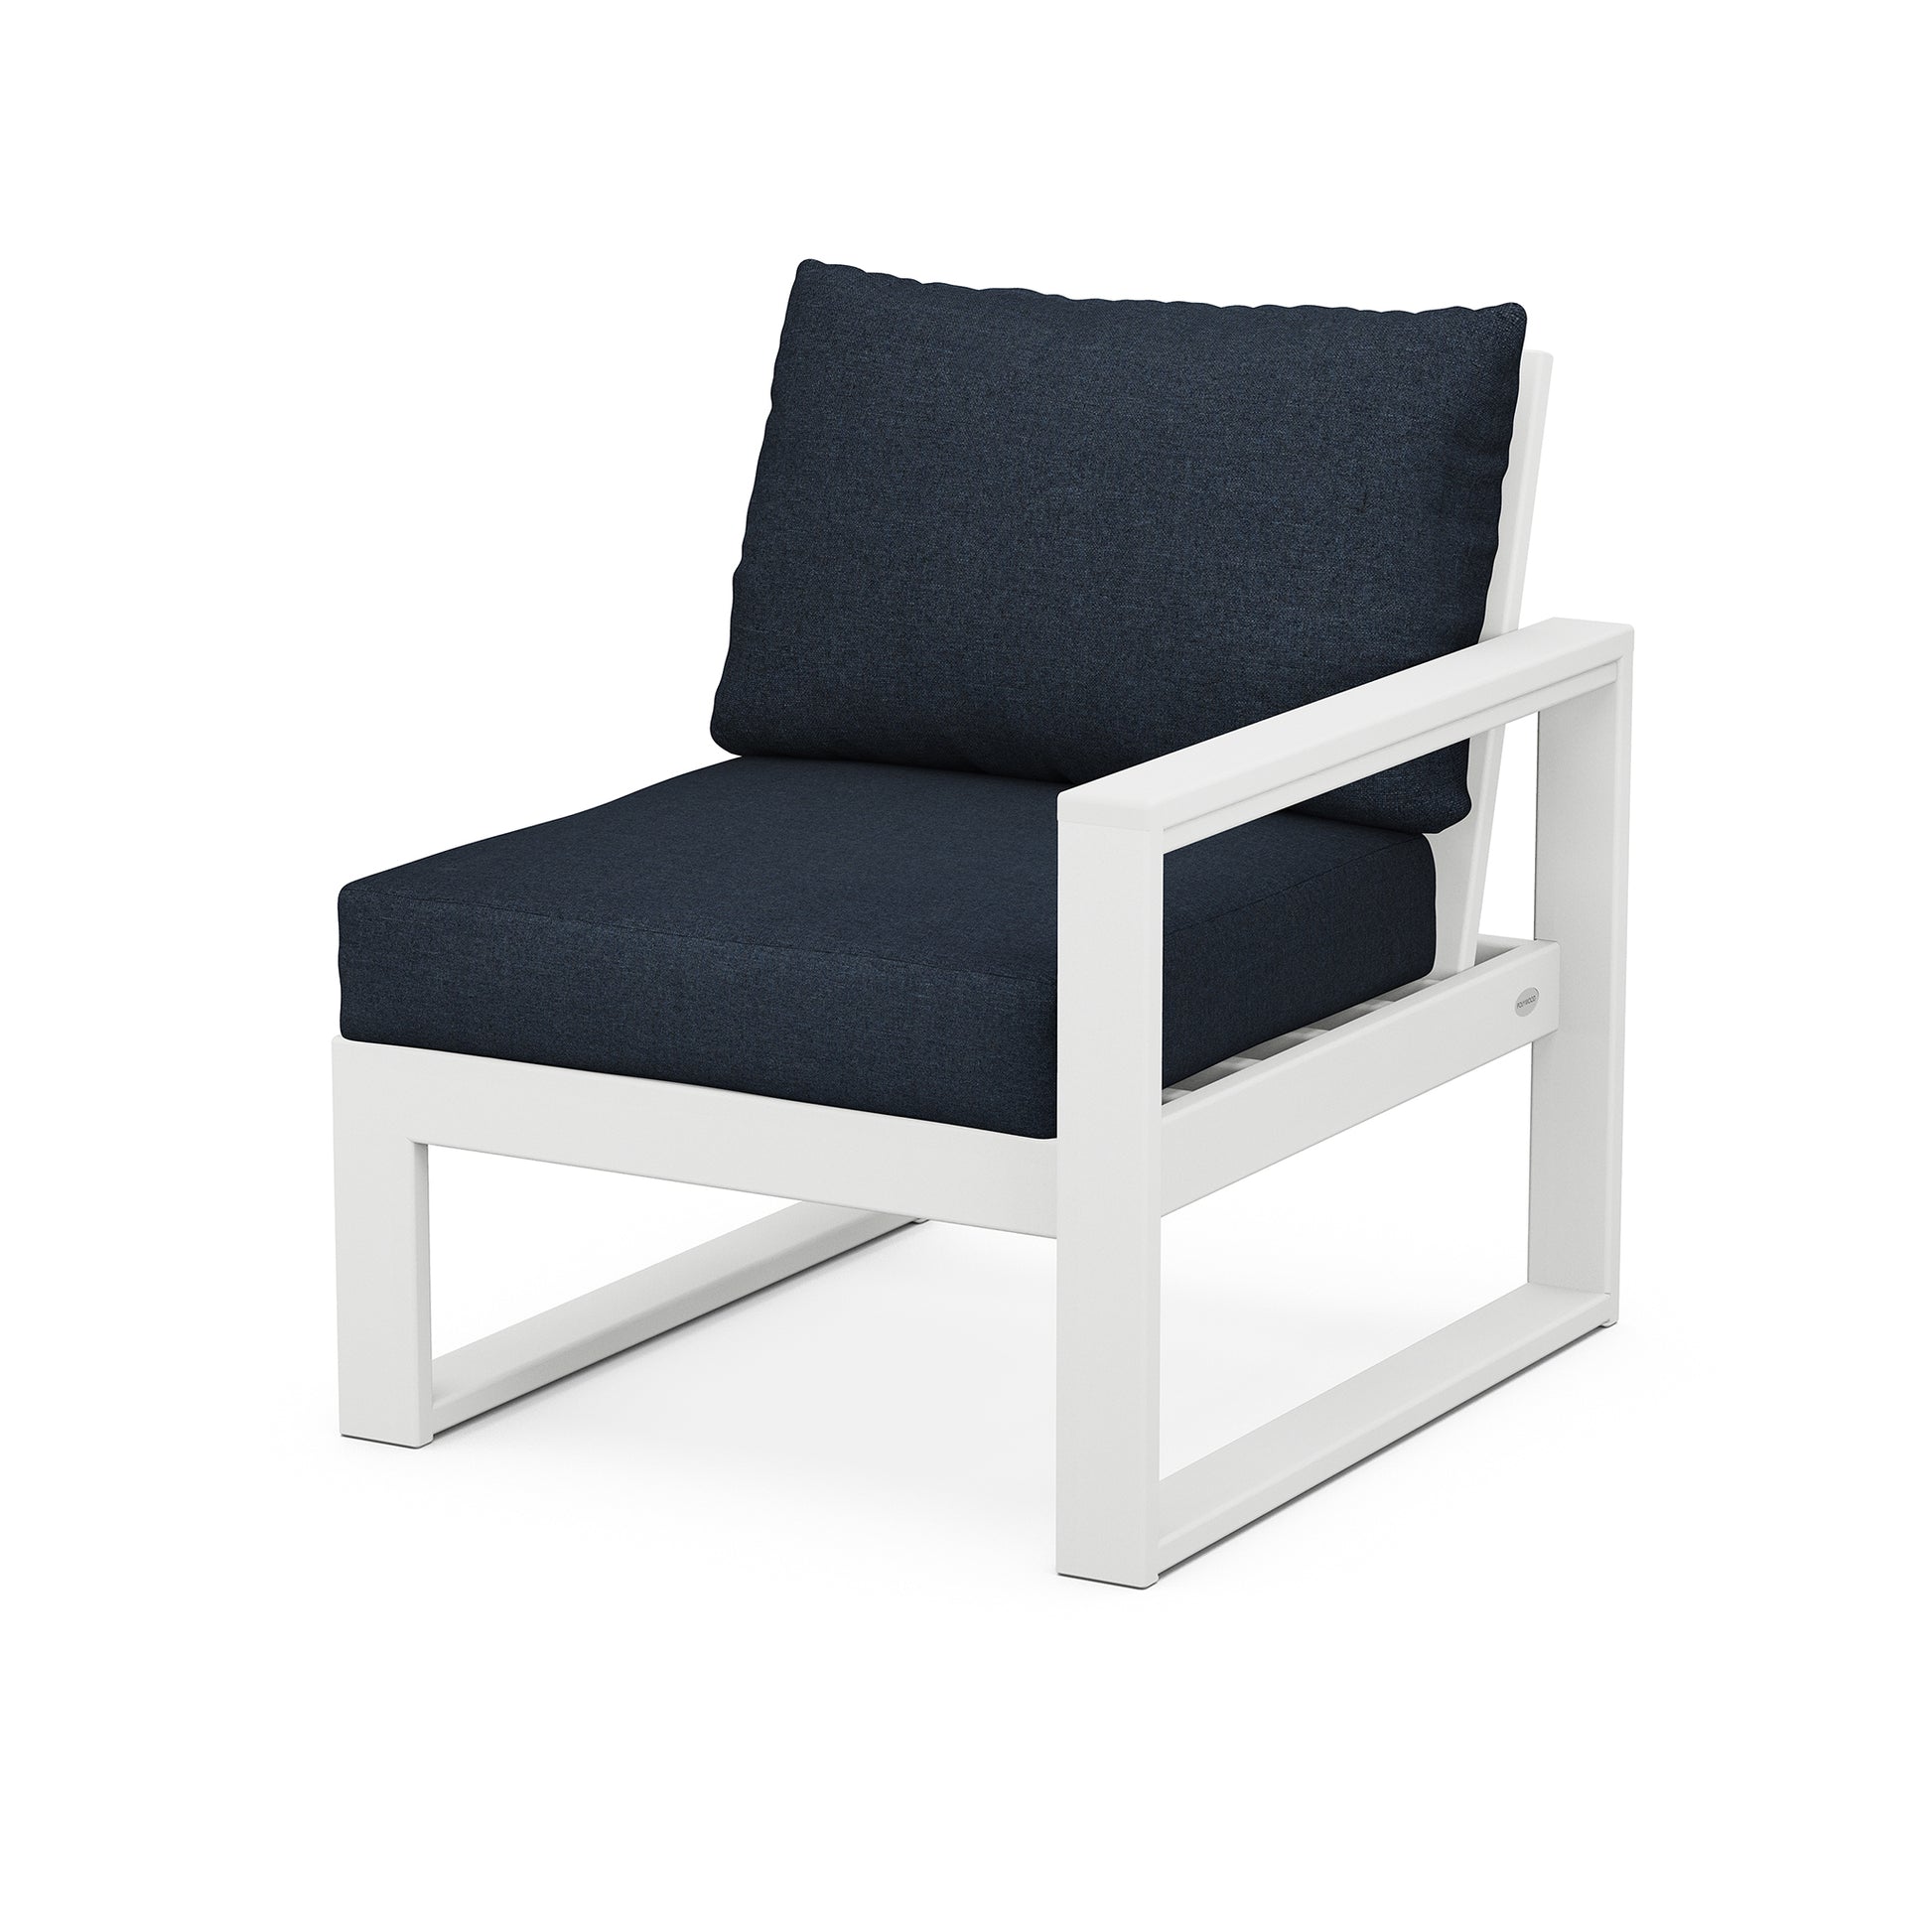 A modern white frame outdoor chair with a thick, dark blue cushion and a matching back pillow, isolated on a white background. Product Name: POLYWOOD EDGE Modular Right Arm Chair Brand Name: POLYWOOD